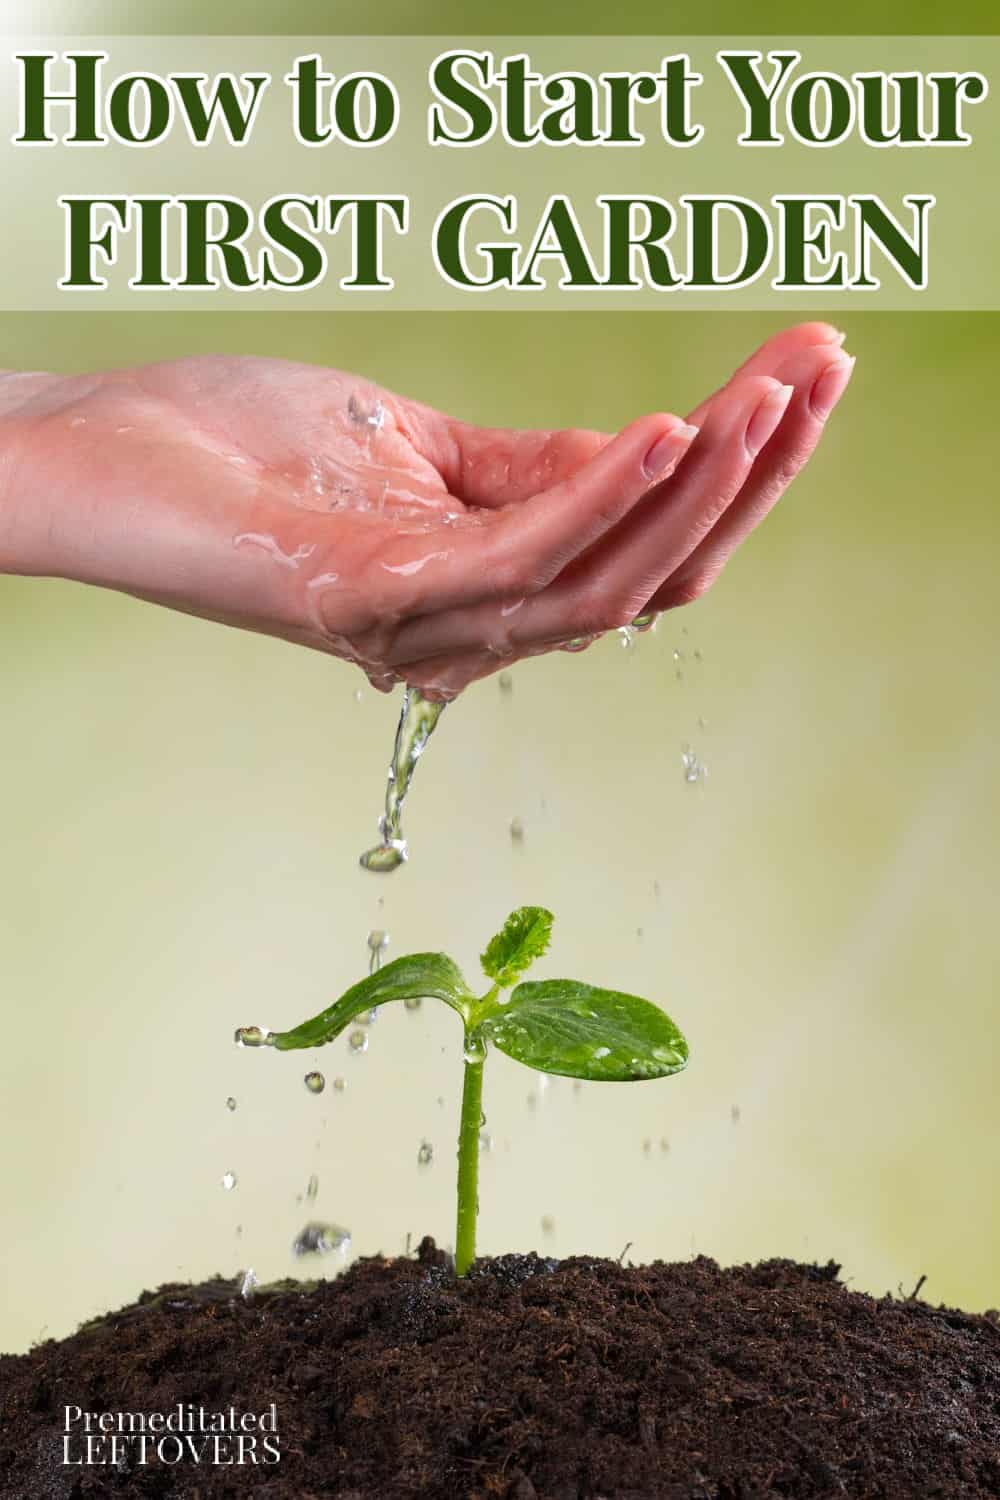 a hand sprinling water on a seedling in a new garden